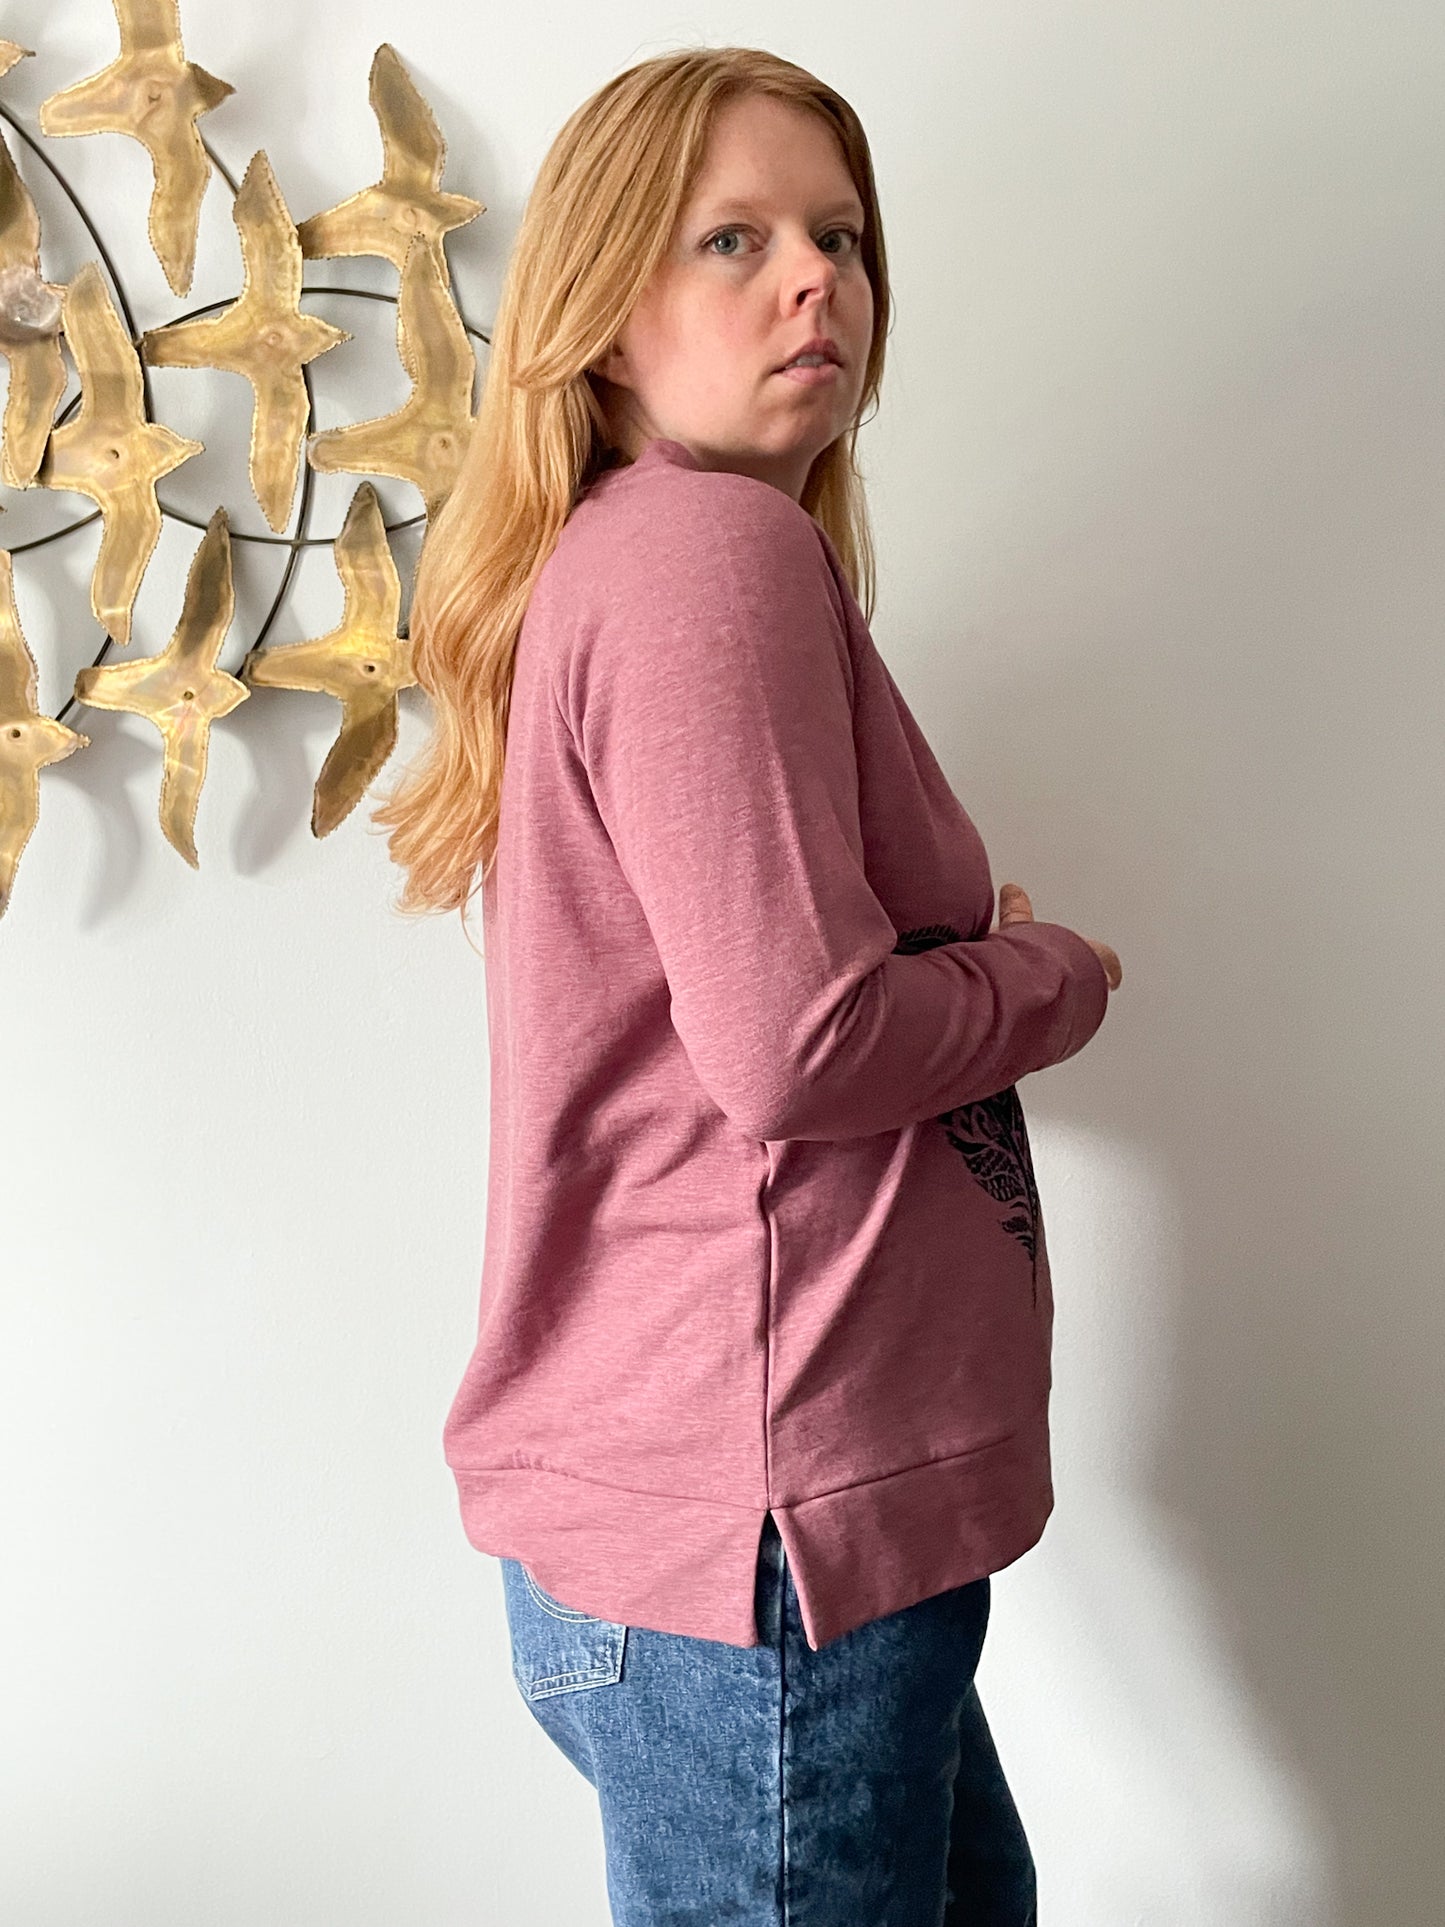 Upcycled Heathered Dark Pink Sweater with Sparkling Falling Feathers - M/L